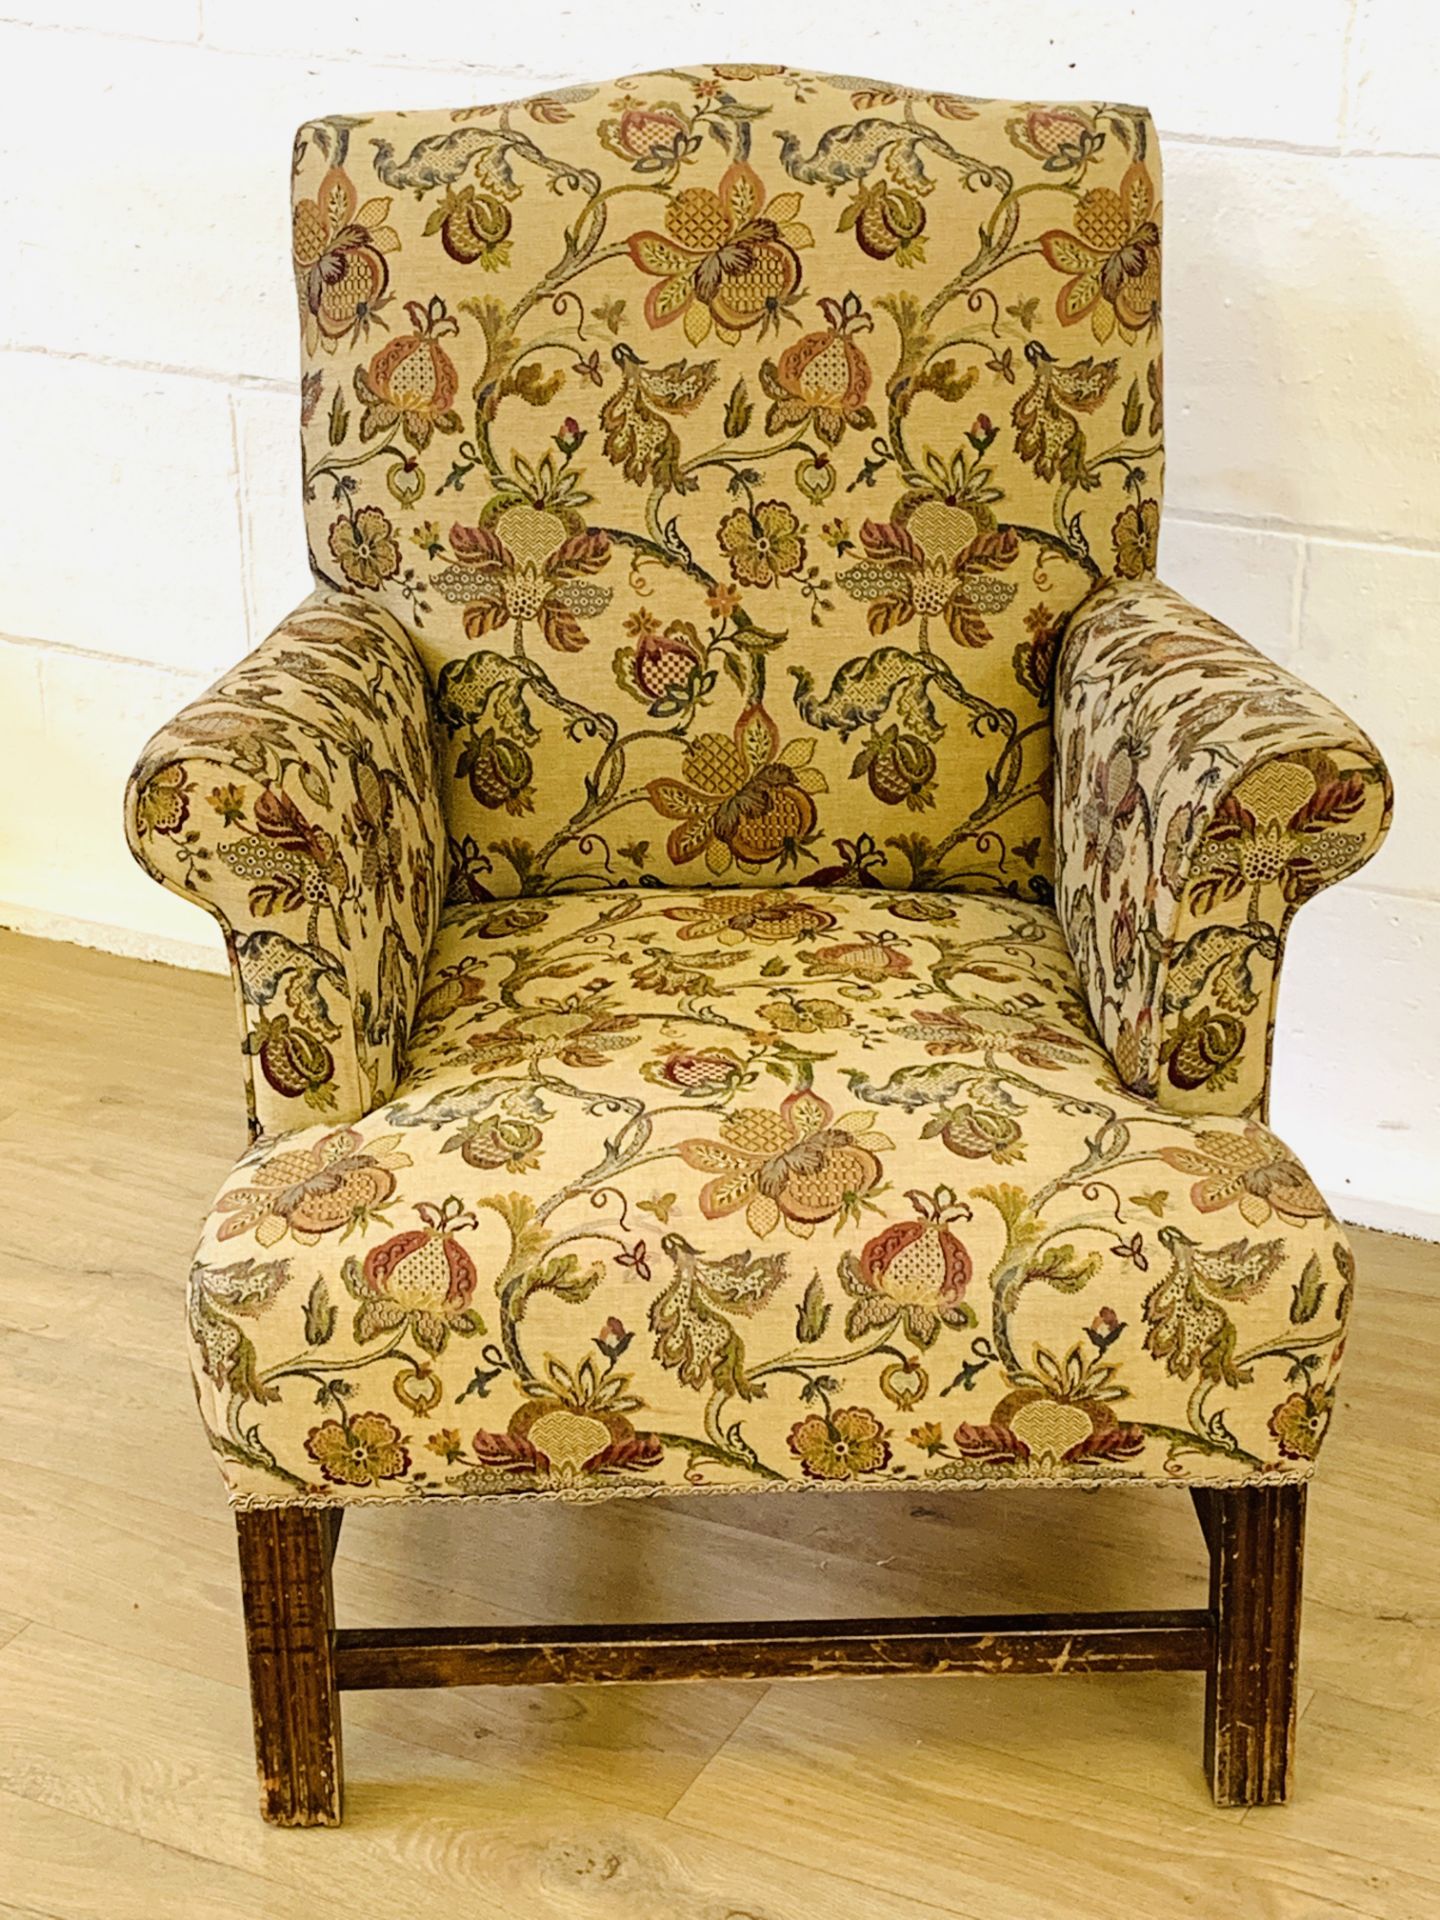 Upholstered armchair - Image 3 of 4